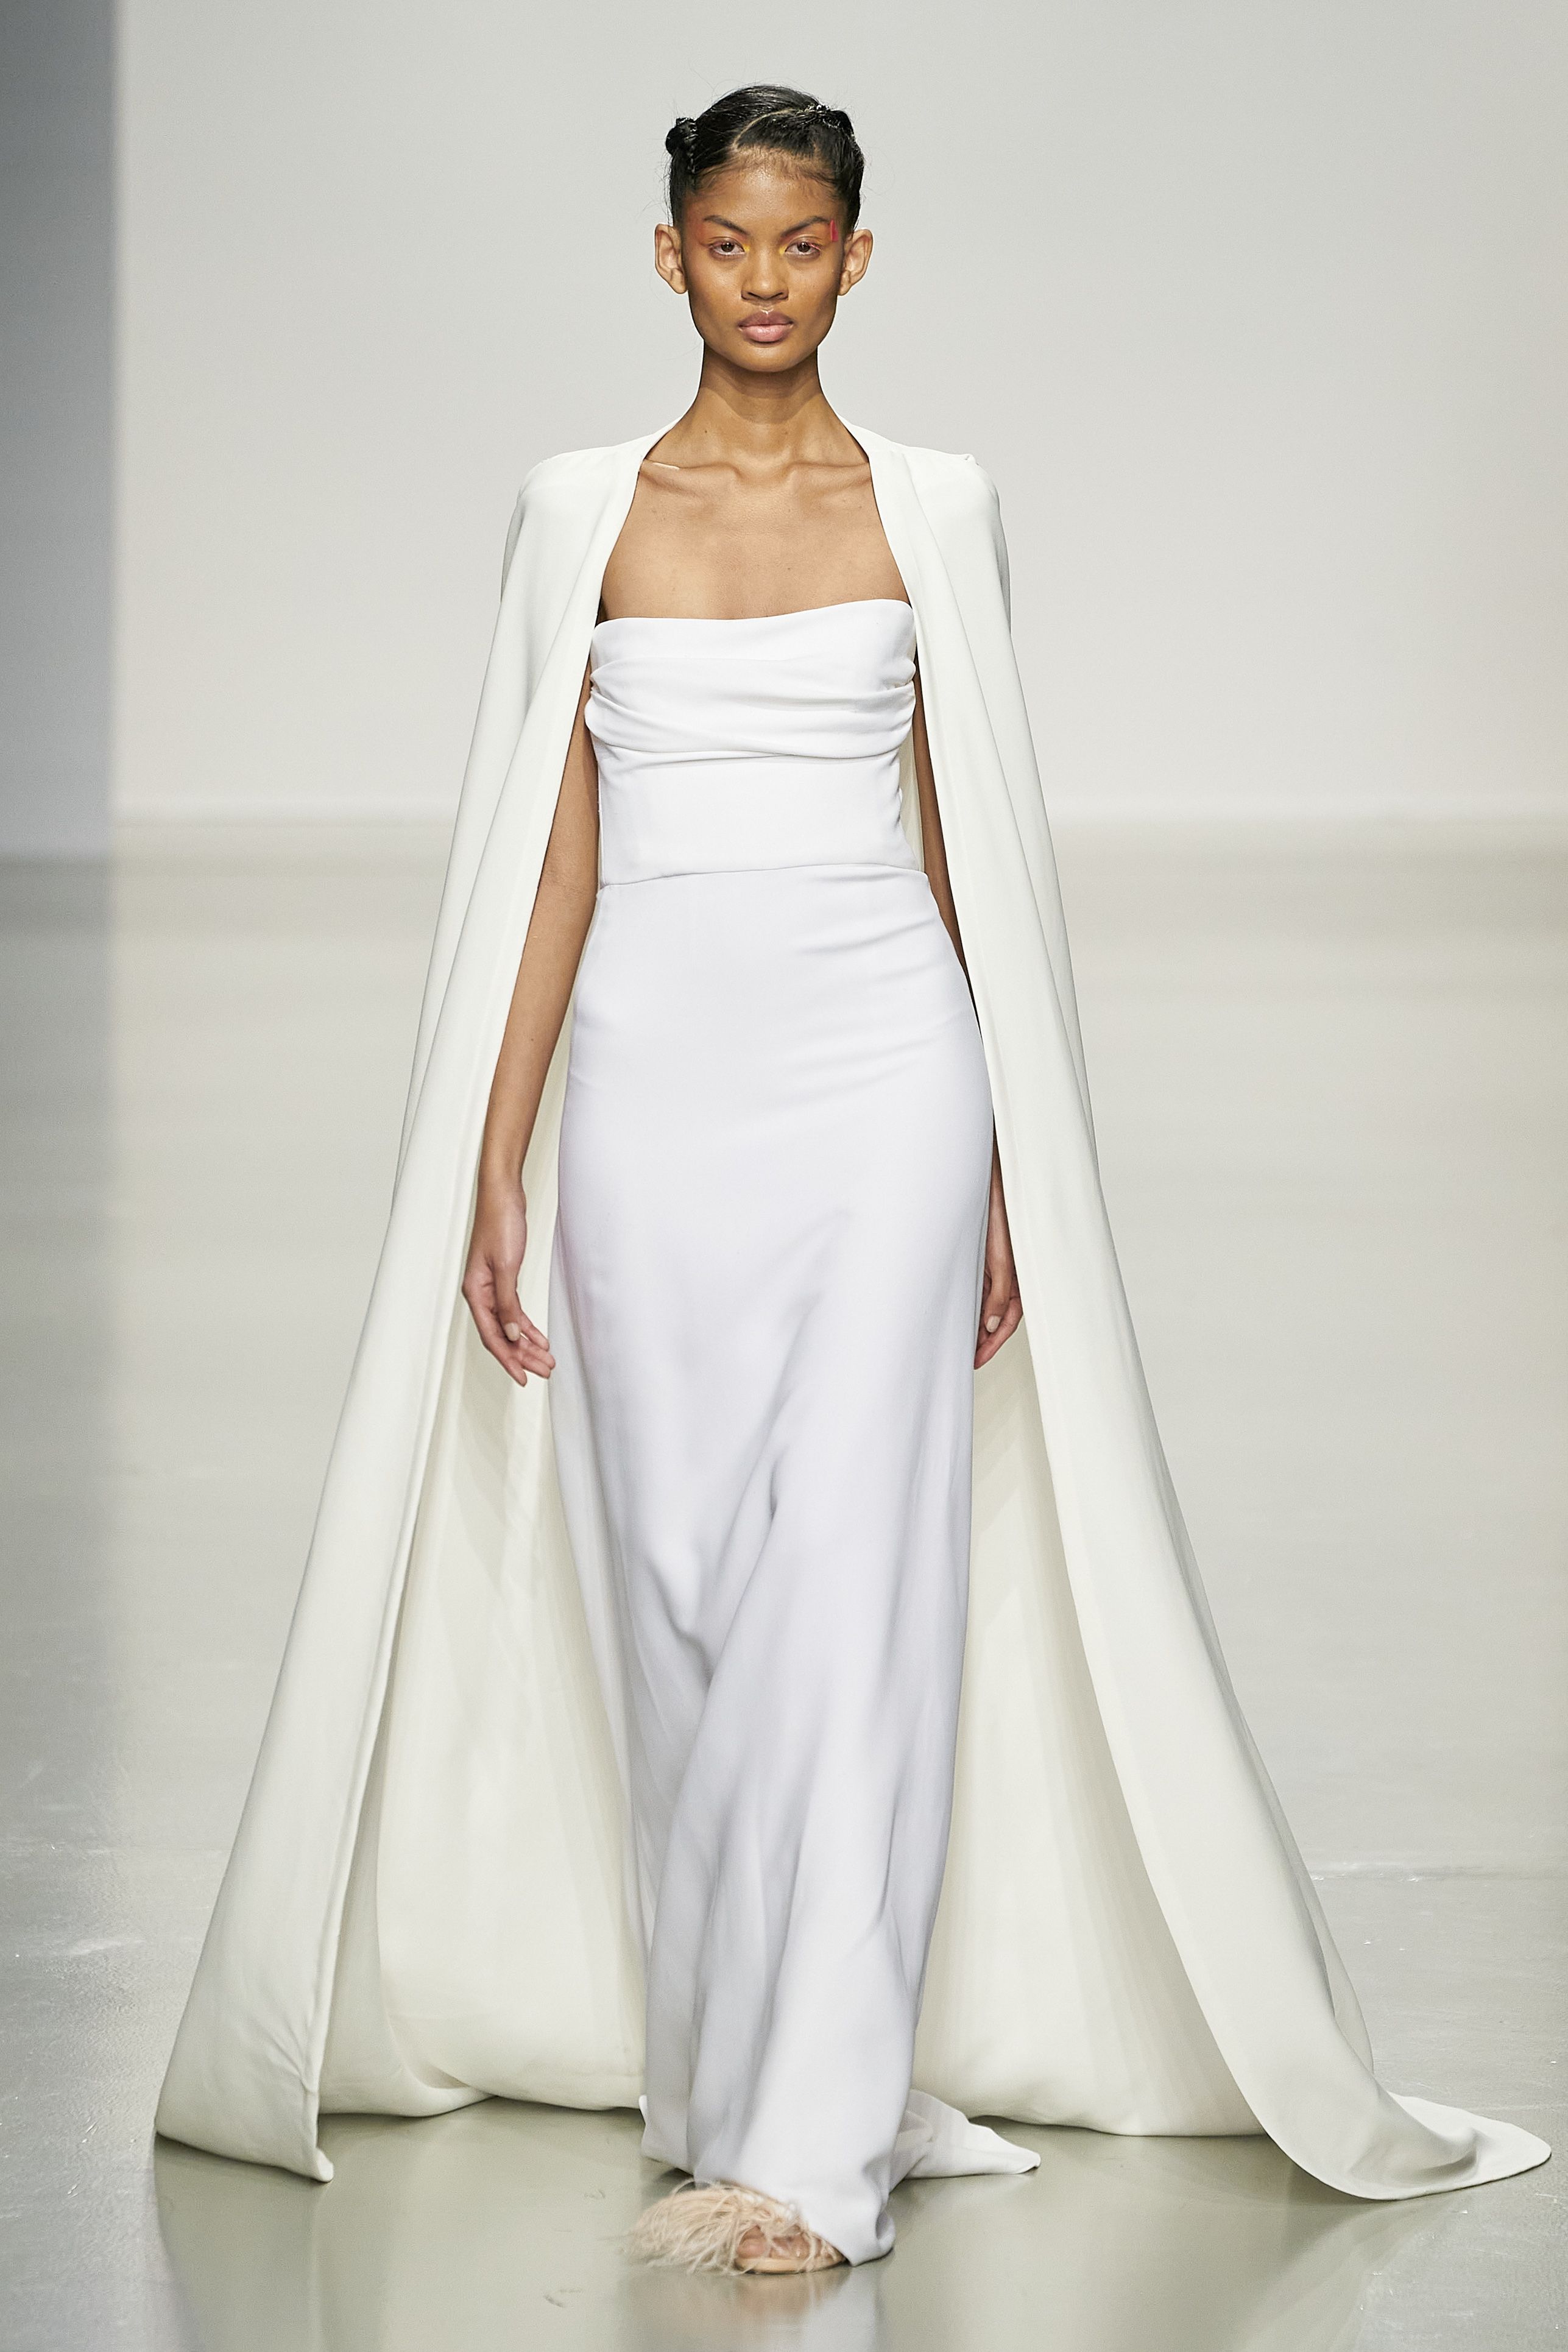 Wedding dress inspiration from the couture catwalks